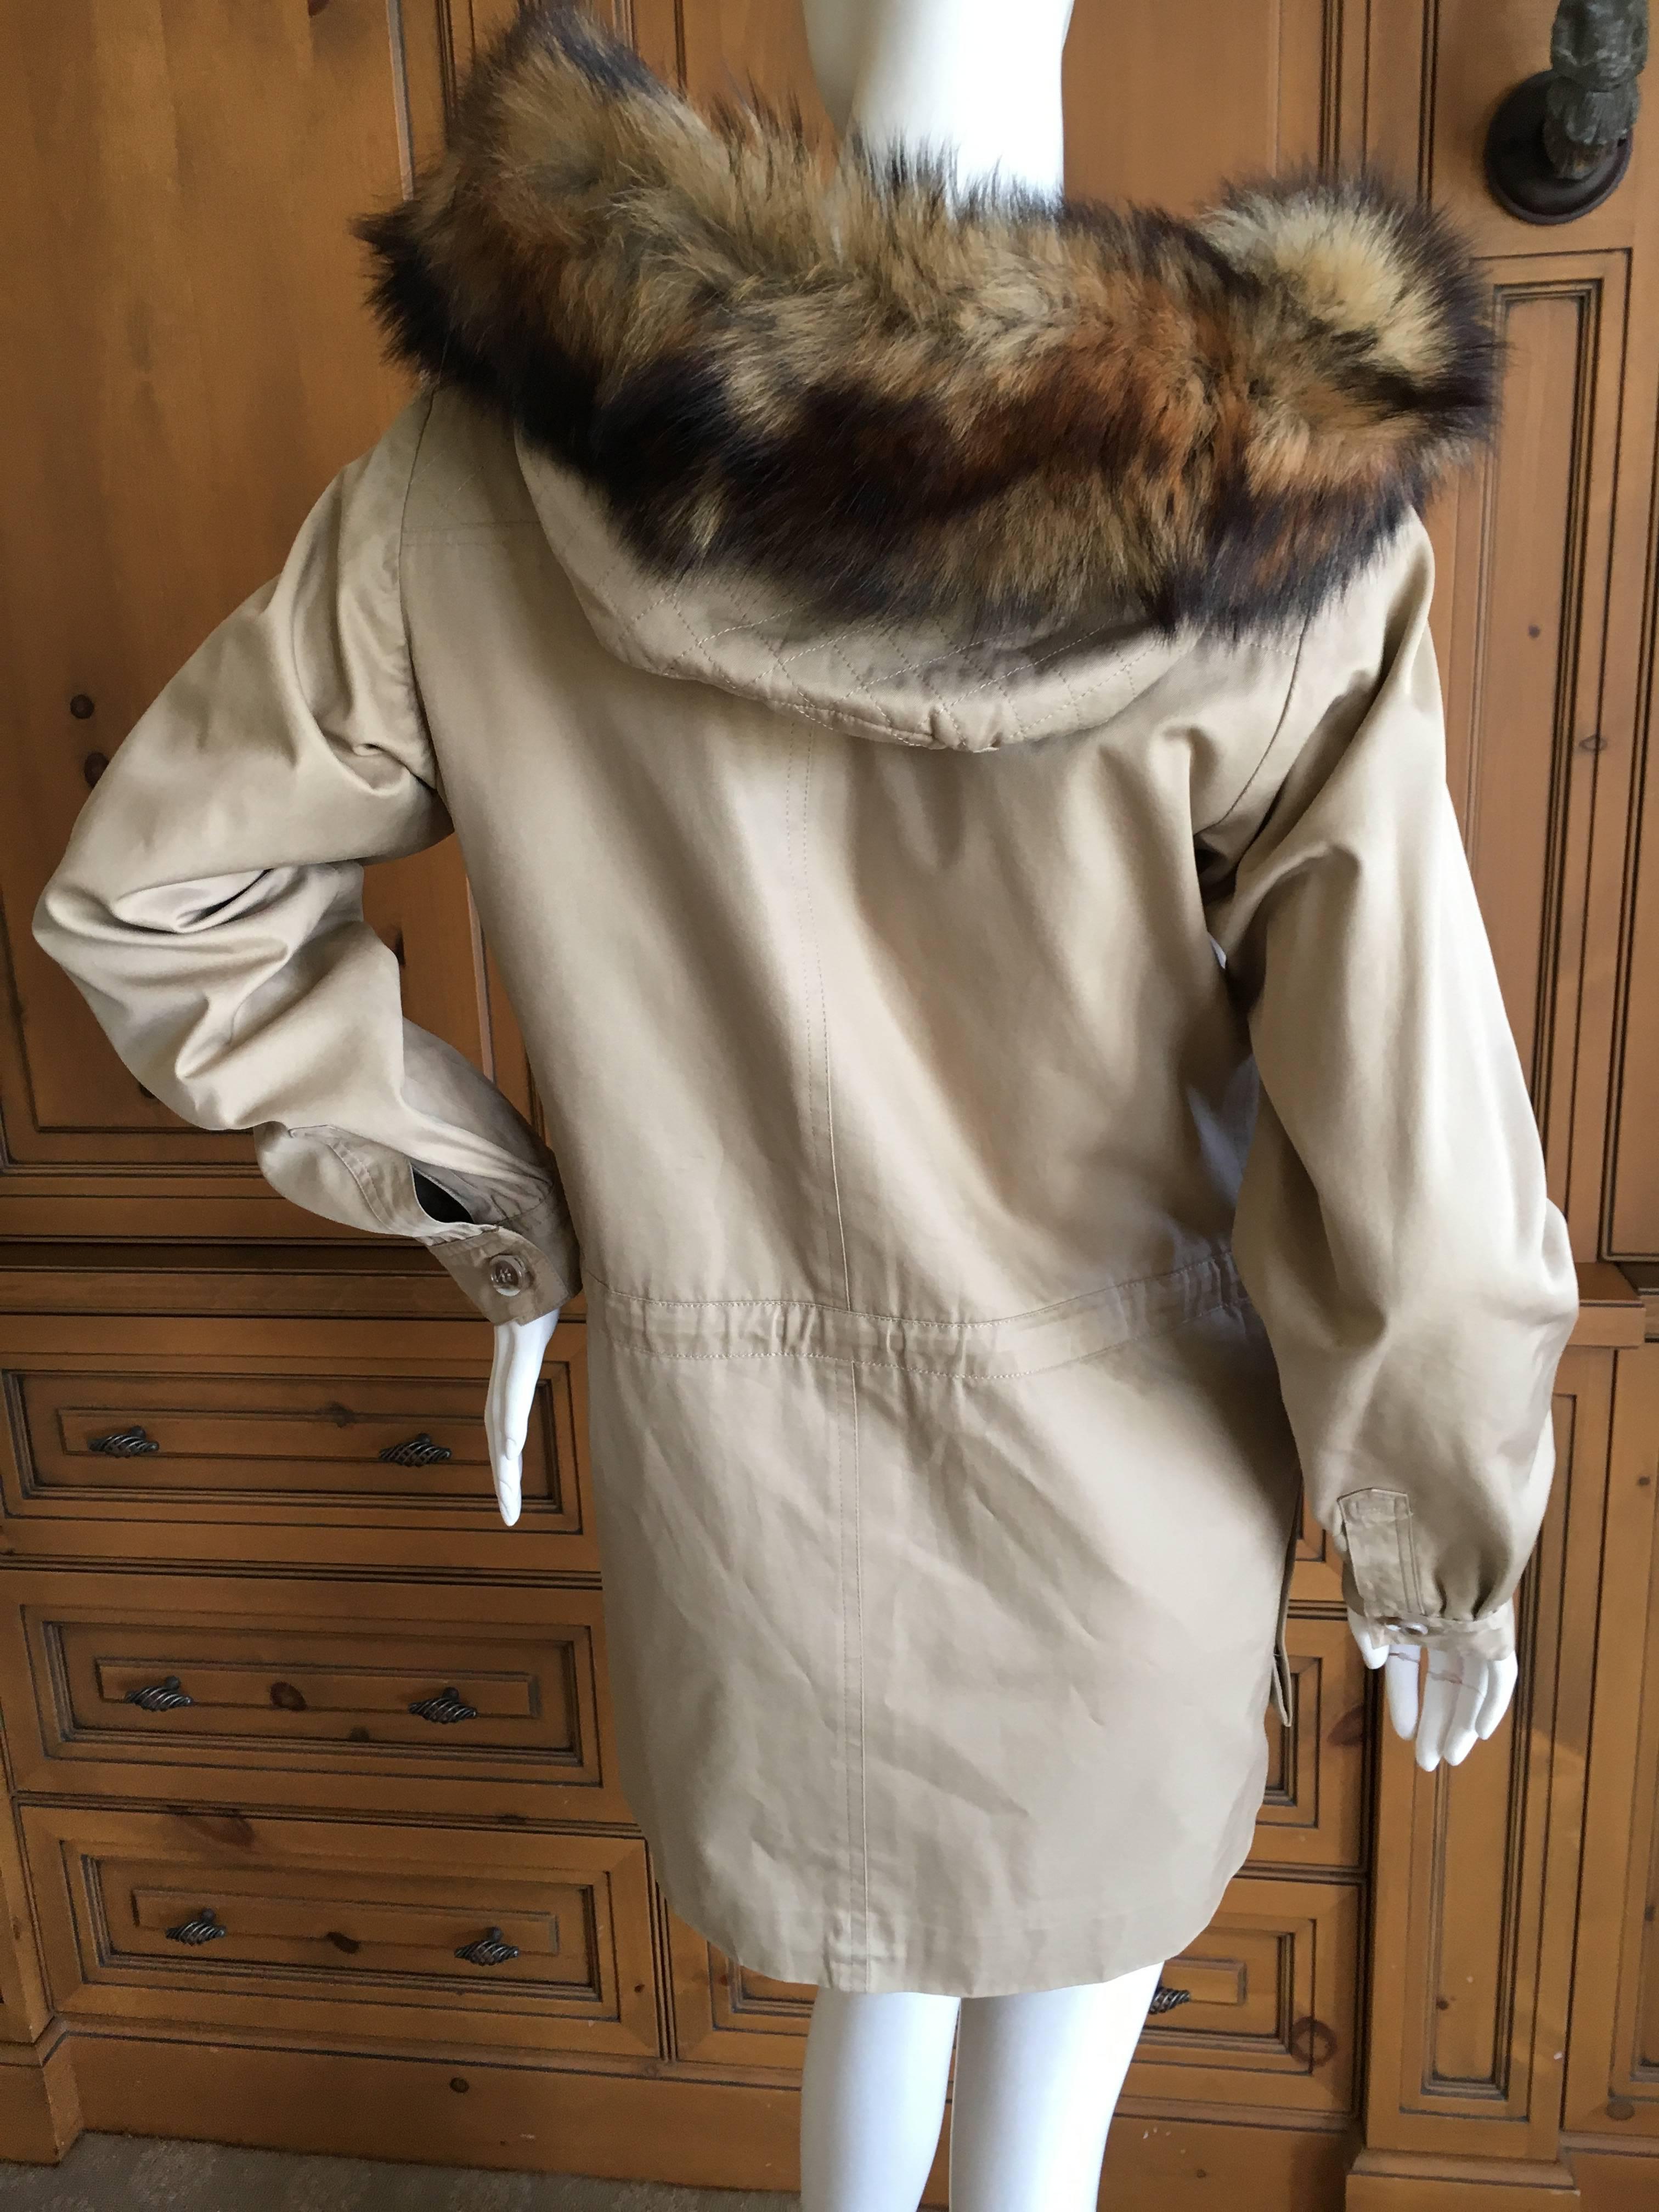 Saint Laurent Rive Gauche 1970's Tan Jacket with Furl Trim Hood In Excellent Condition For Sale In Cloverdale, CA